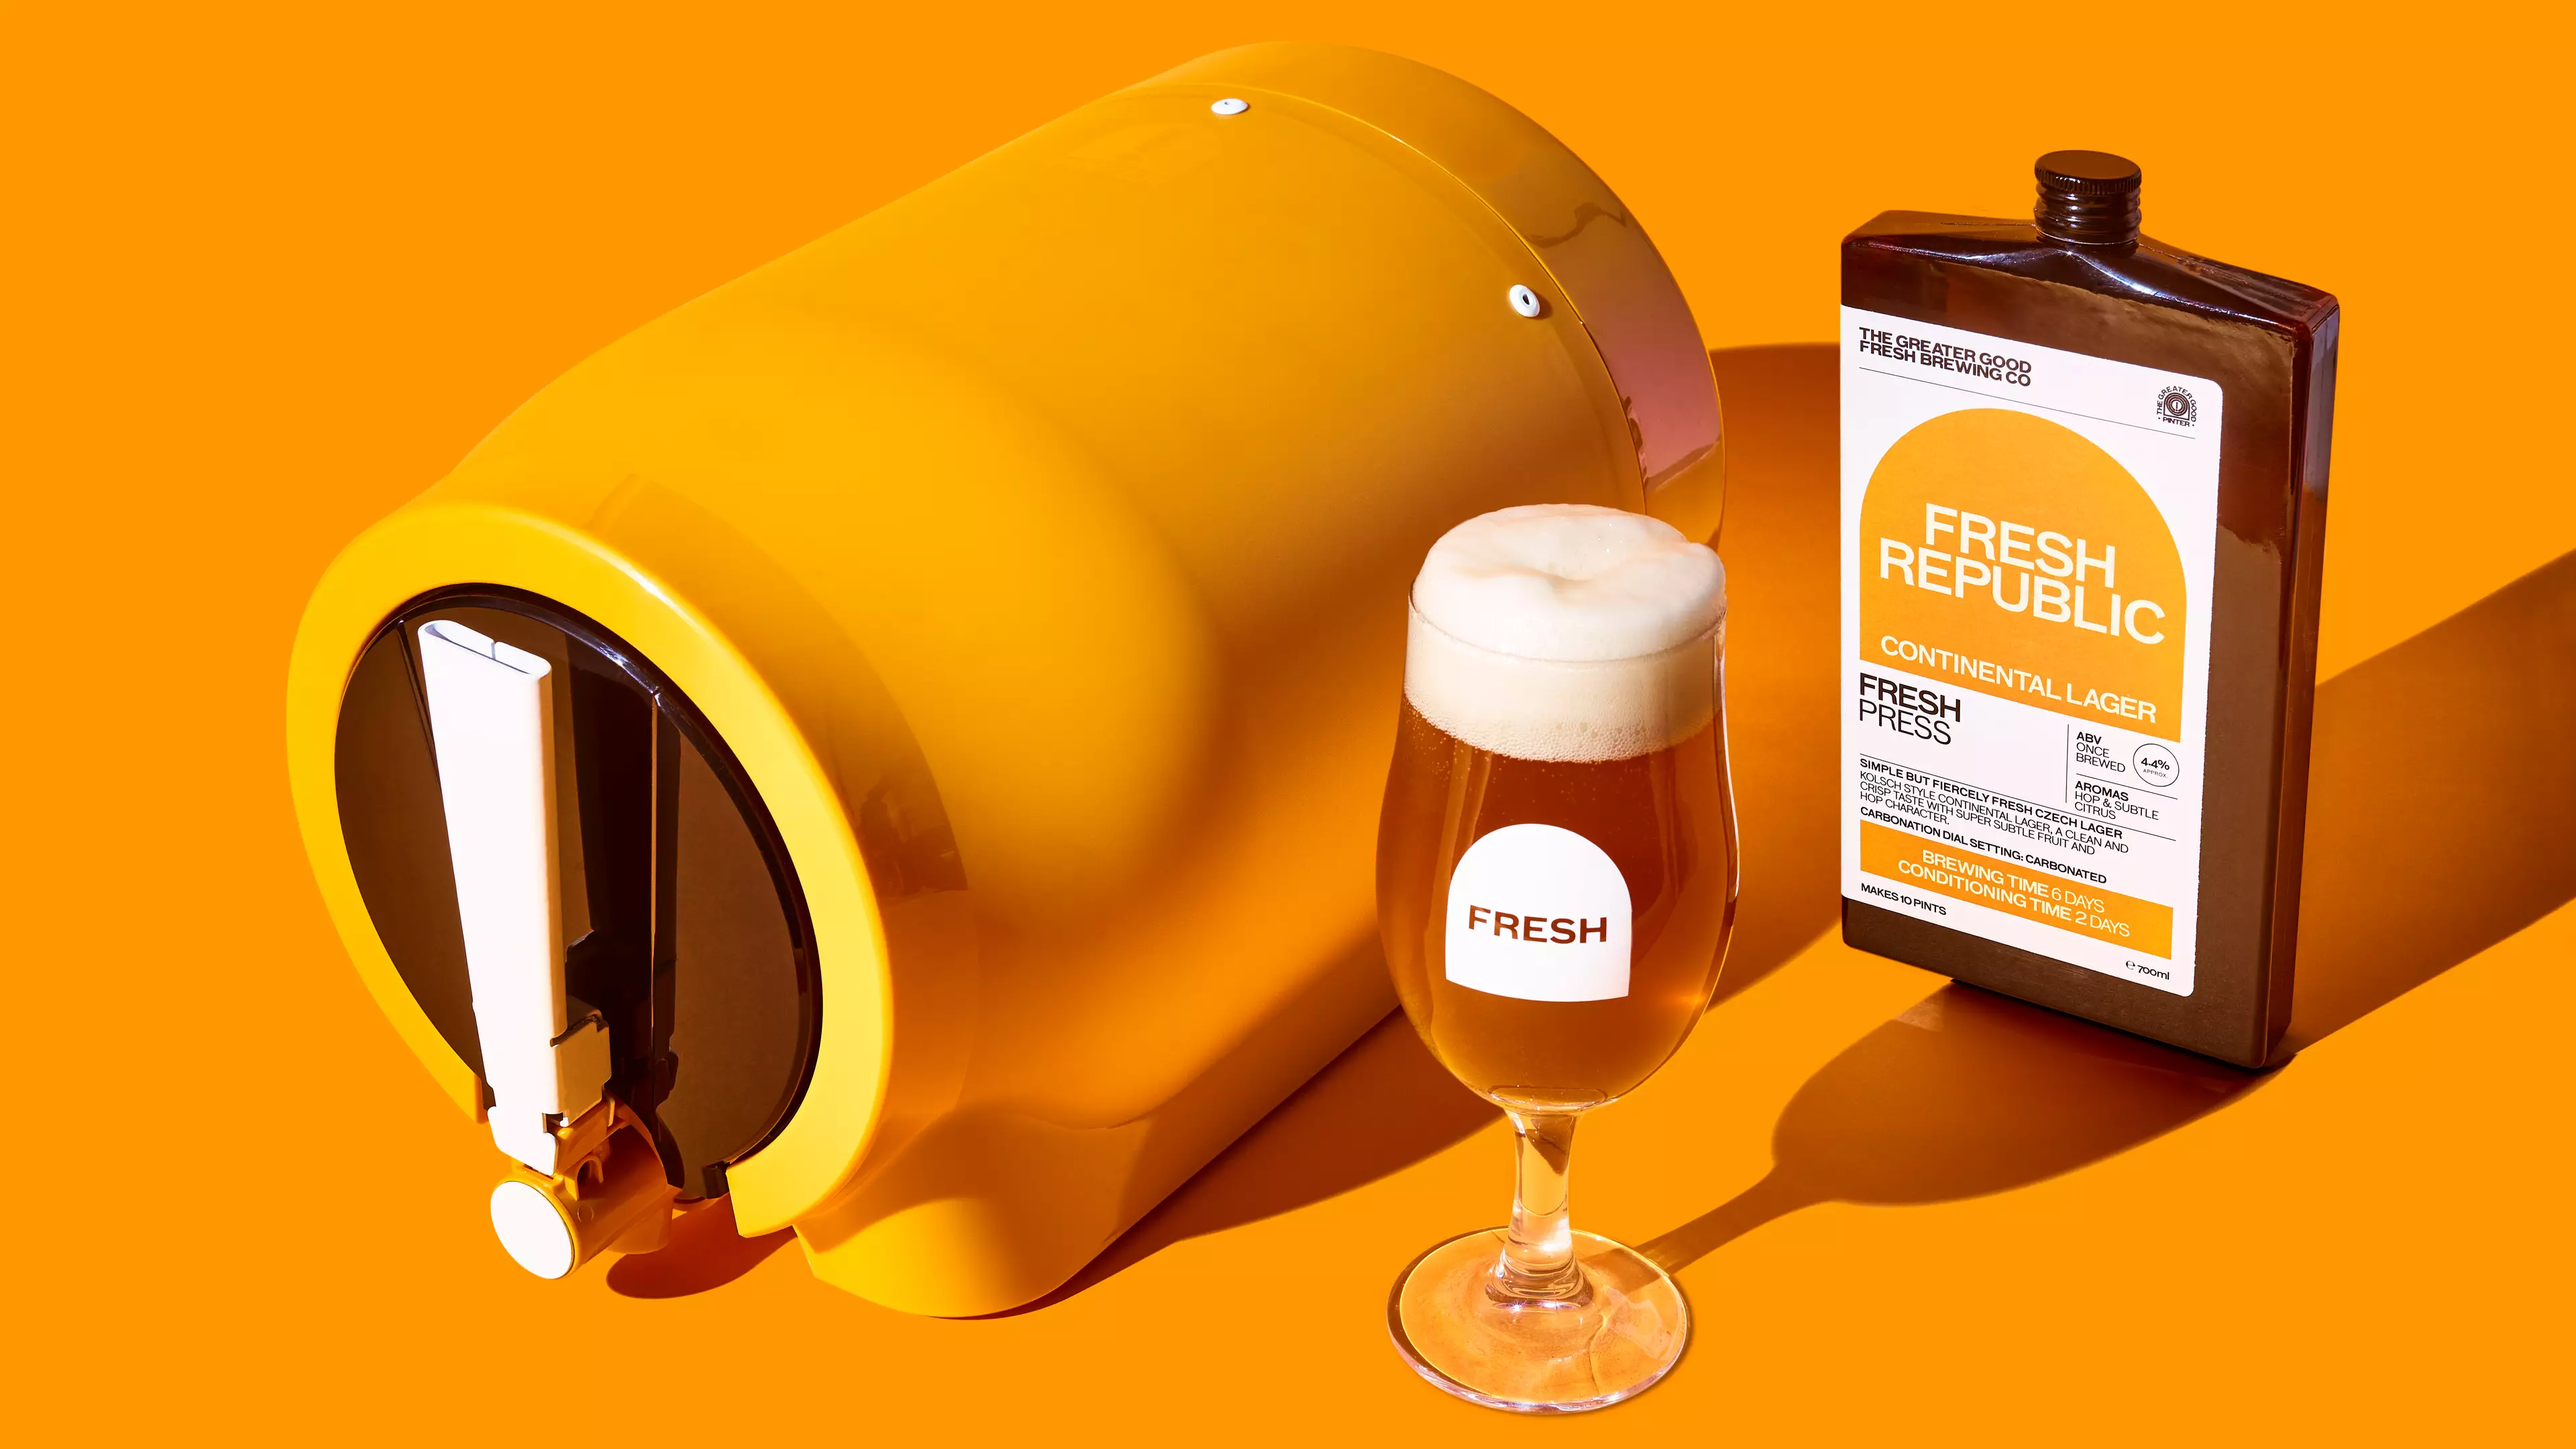 You Can Brew Fresh Pints From Home With 'Revolutionary' Beer Machine